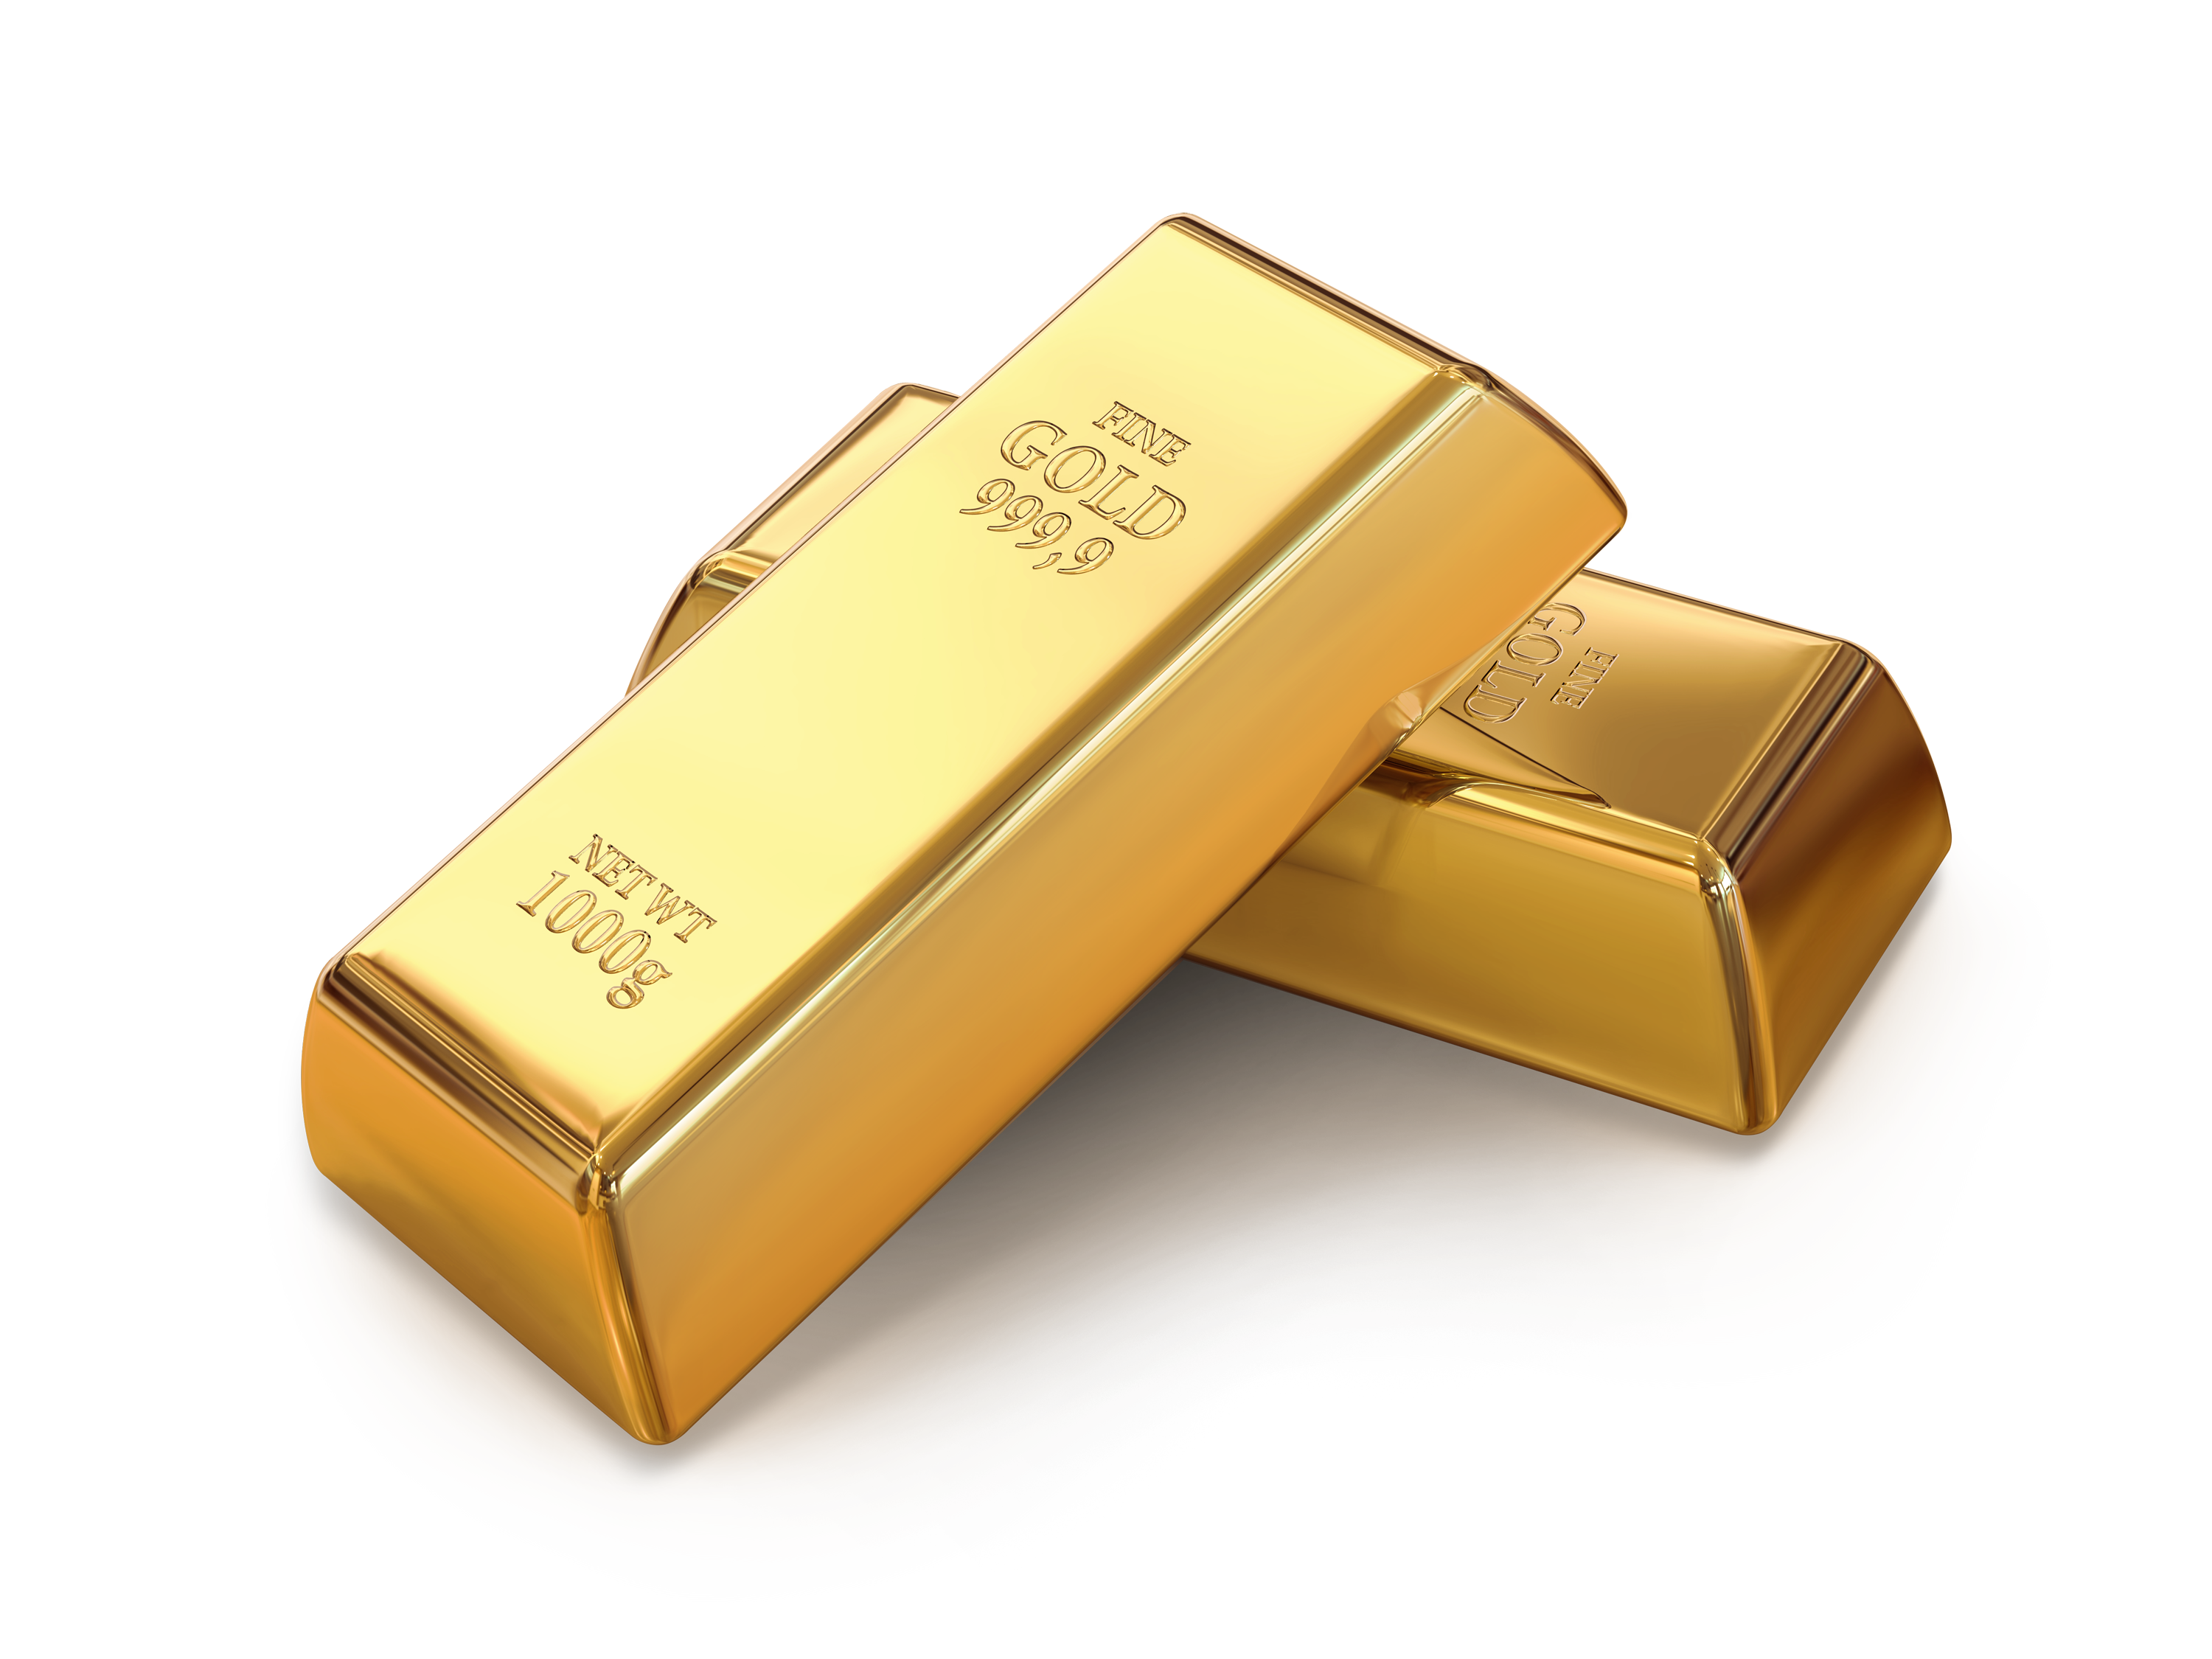 Price of Gold – How High Can it Go?